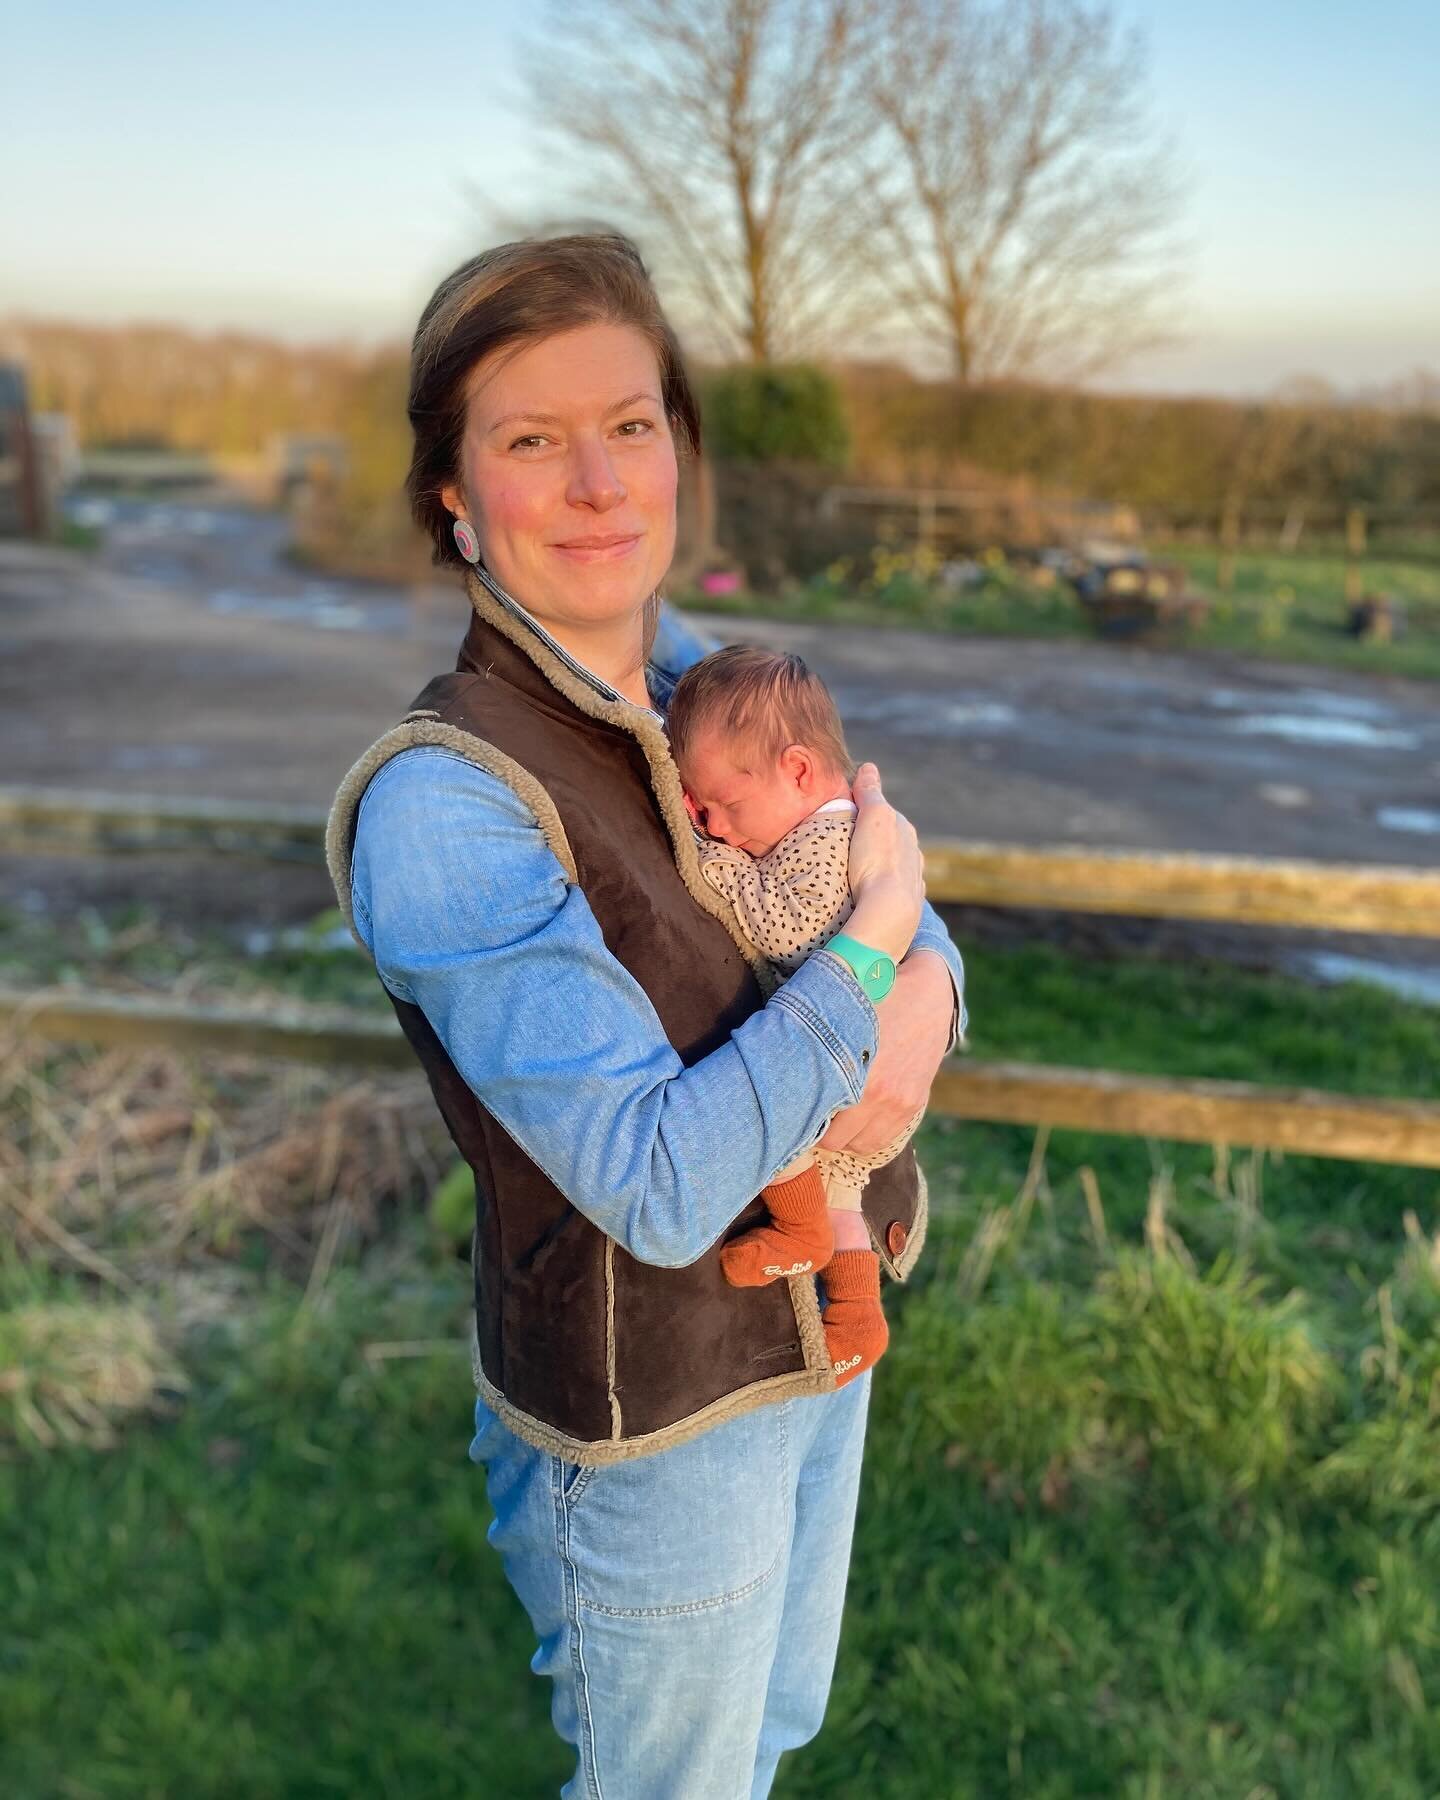 Checking in on International Women&rsquo;s Day with the latest woman to join the BON team! I spent the whole of my pregnancy busy working. Luckily little Inez in my tummy didn&rsquo;t seem to mind the endless hours stood at the kitchen counter mixing